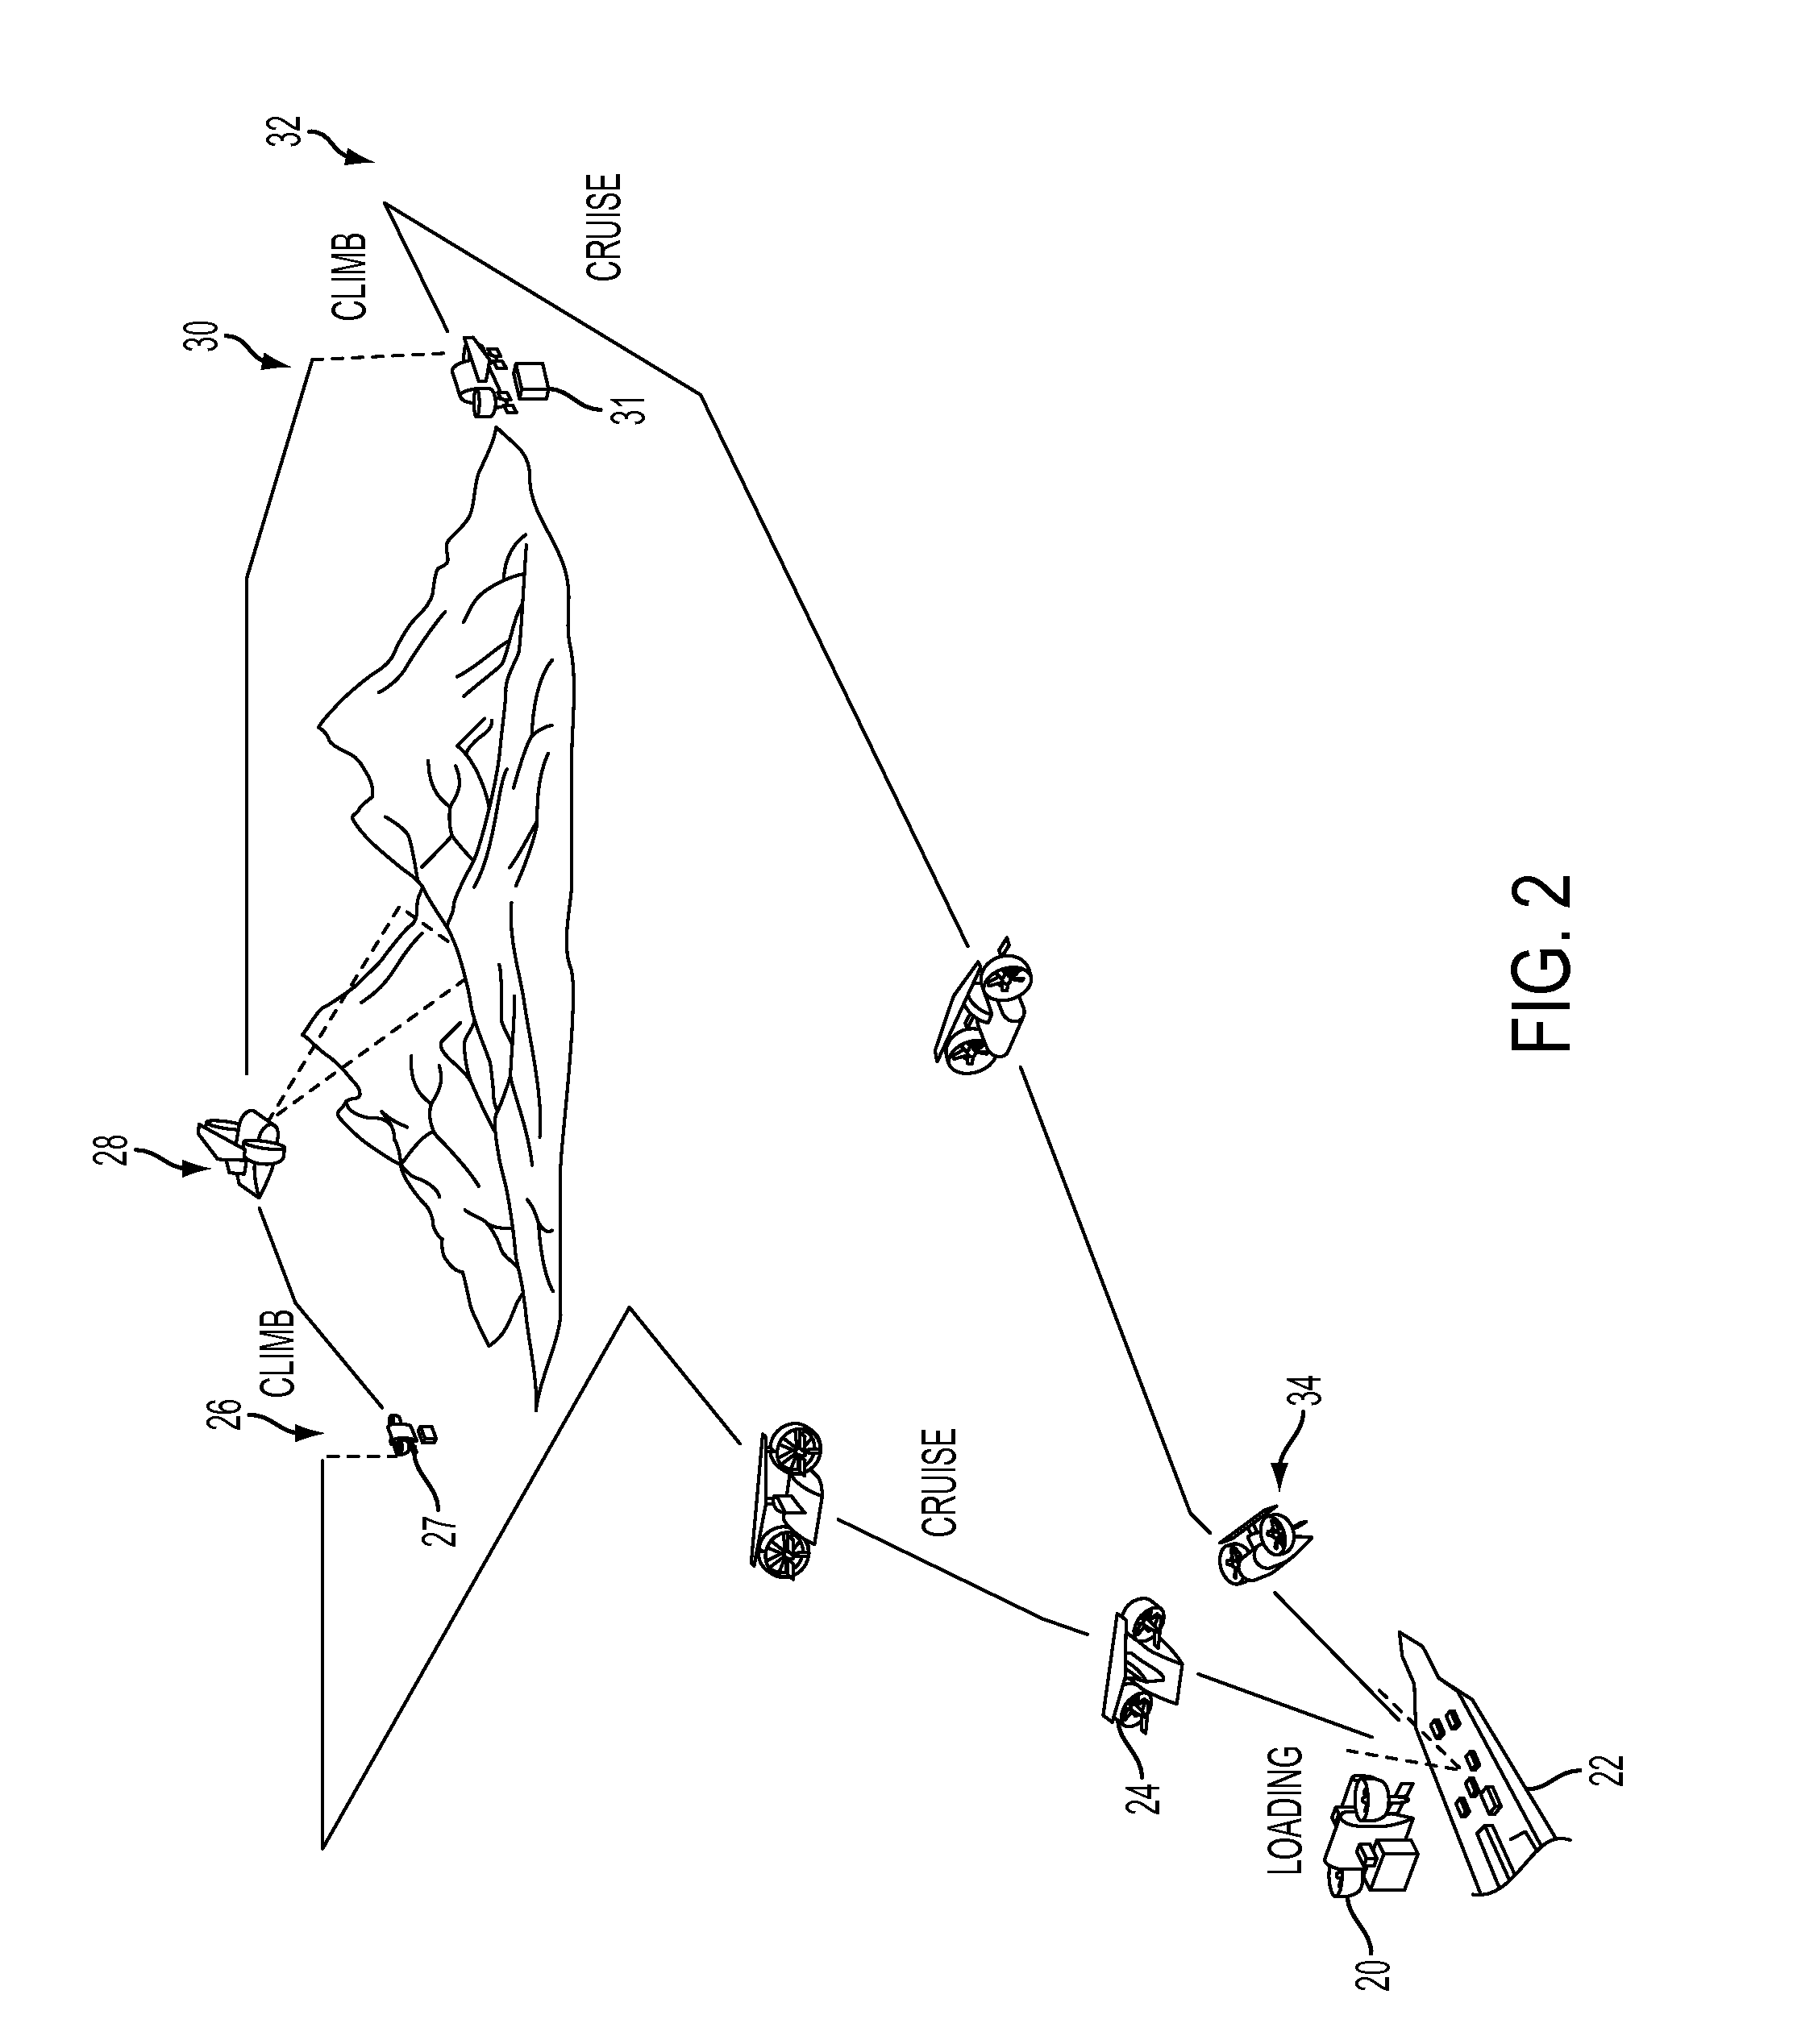 Autonomous Payload Parsing Management System and Structure for an Unmanned Aerial Vehicle